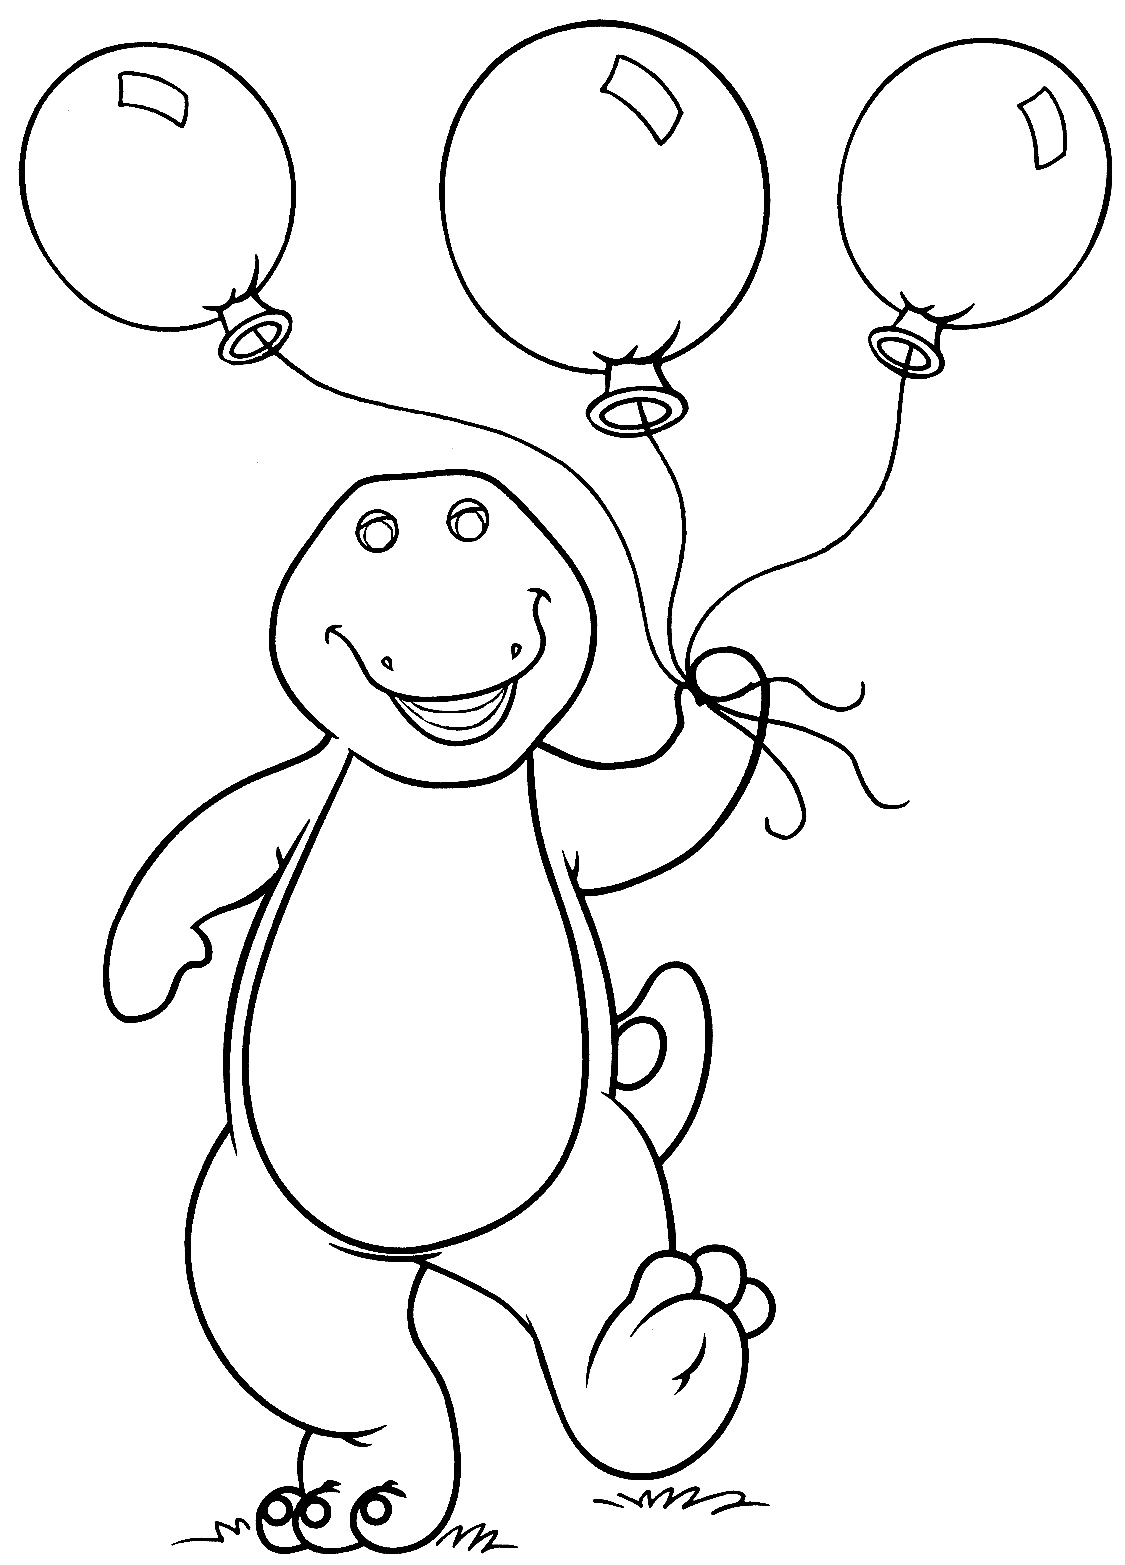 Barney with Baloons Coloring Page